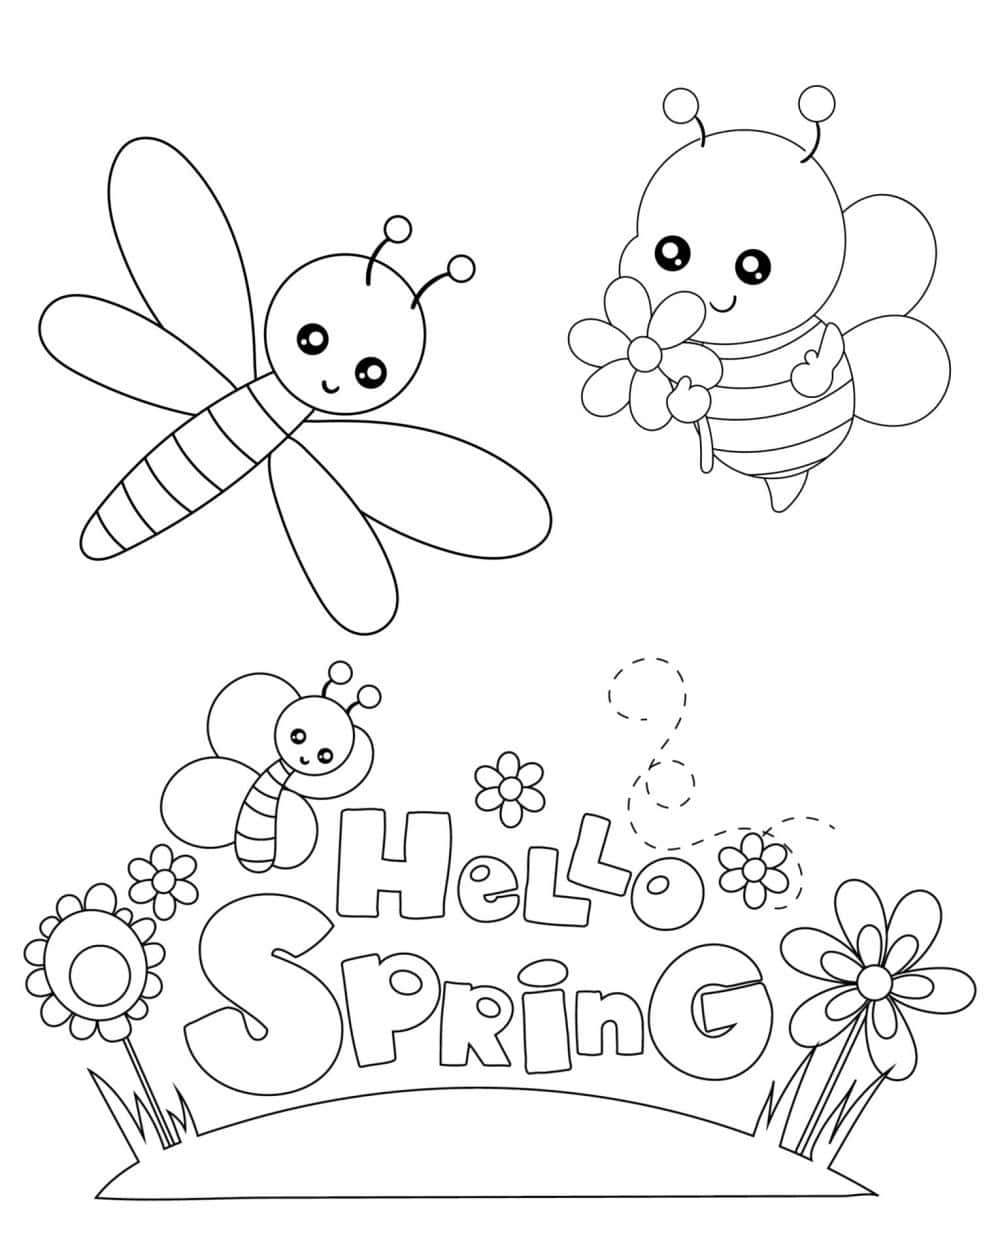 From budding flowers to migrating birds, explore the beauty of Spring with this gorgeous coloring page!